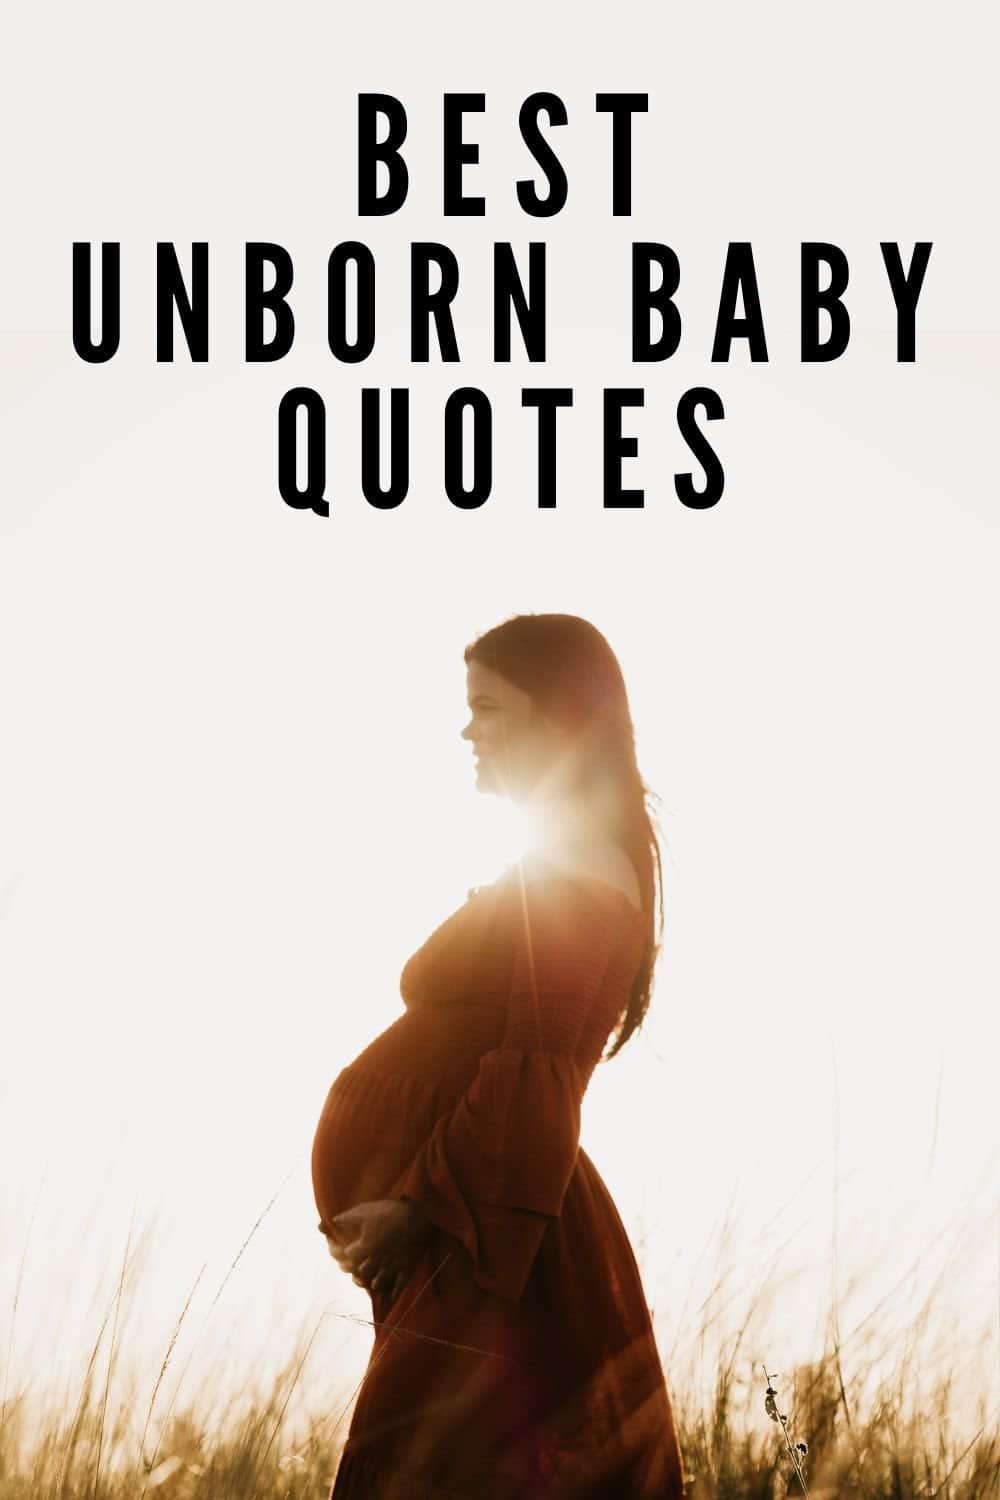 unborn baby quotes pinterest pin